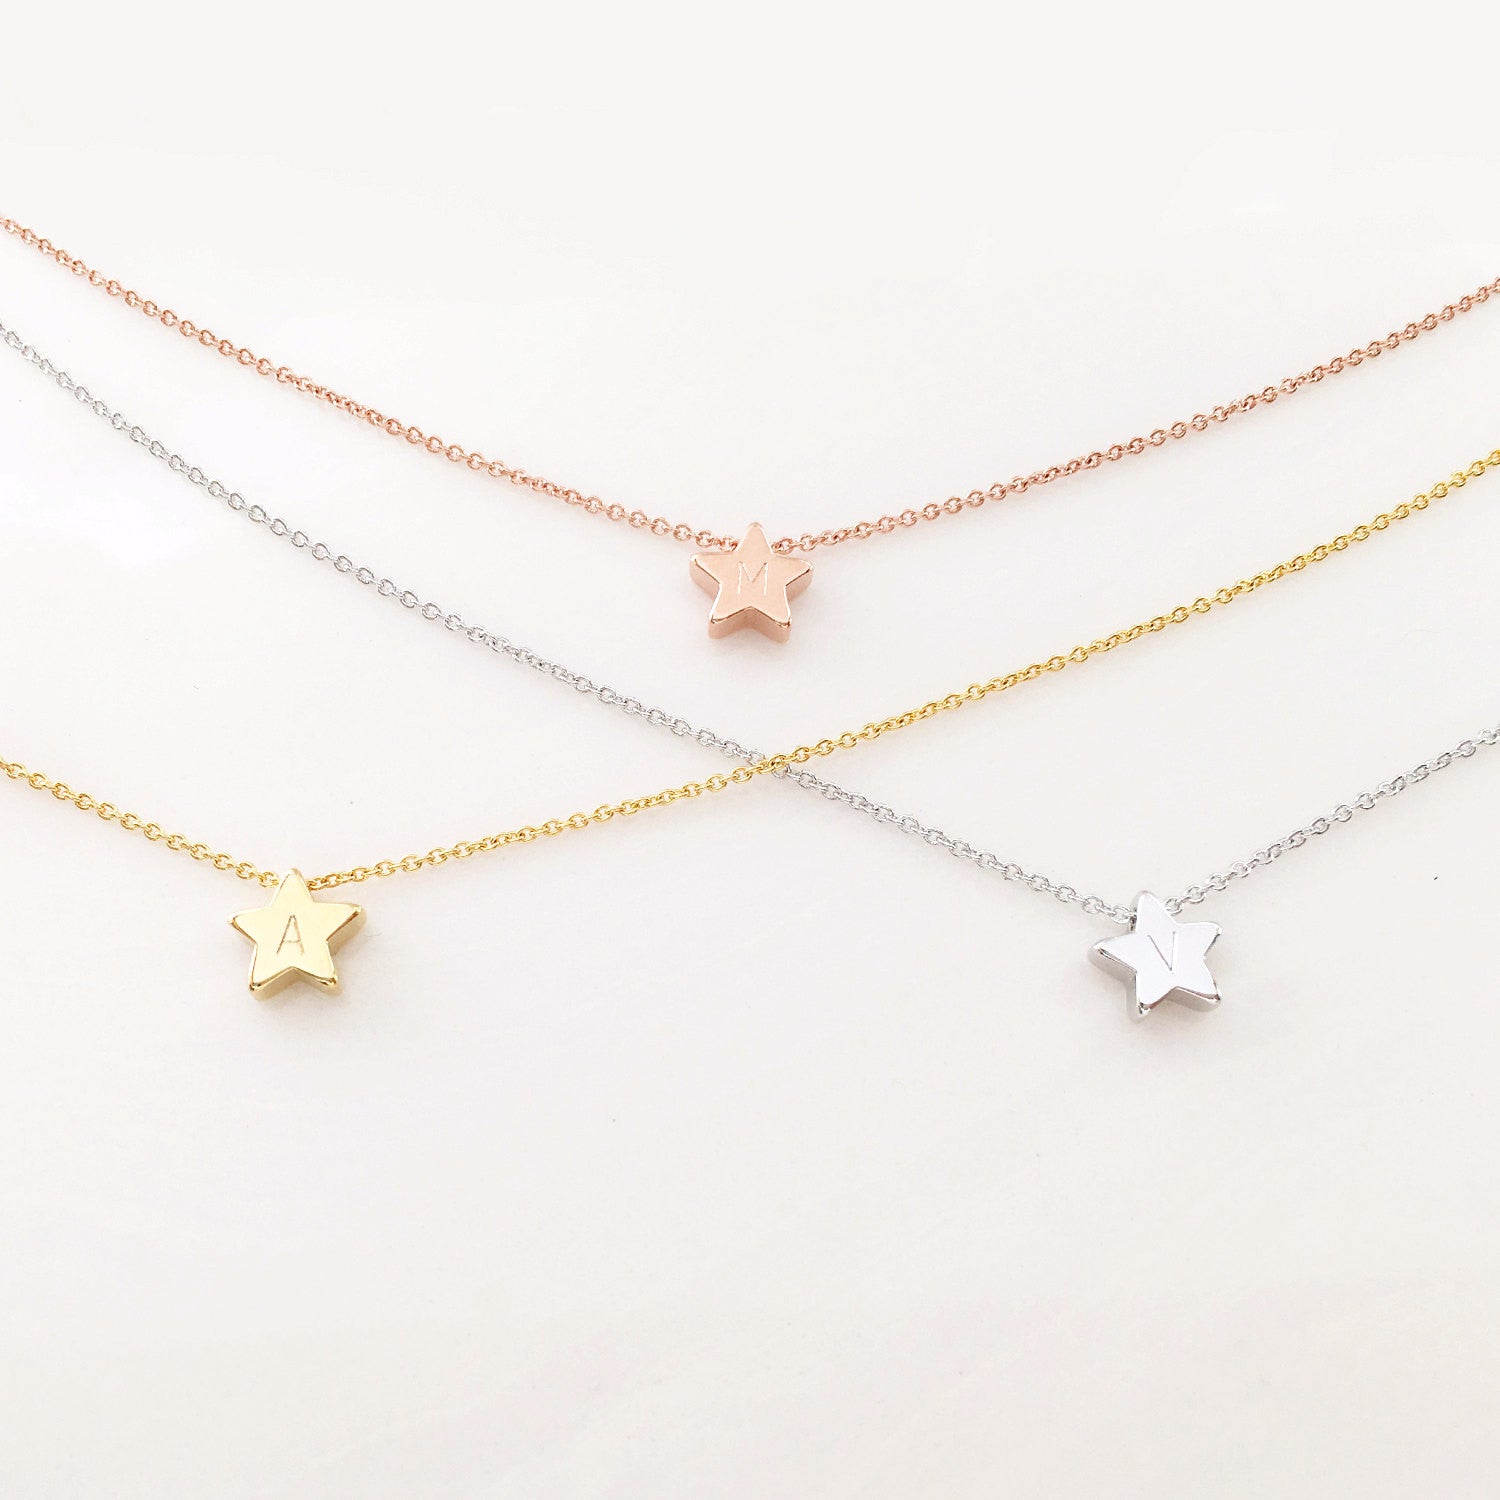 Petite Star Charm Necklace, Flower Girl Necklace - Mignon and Mignon - 1